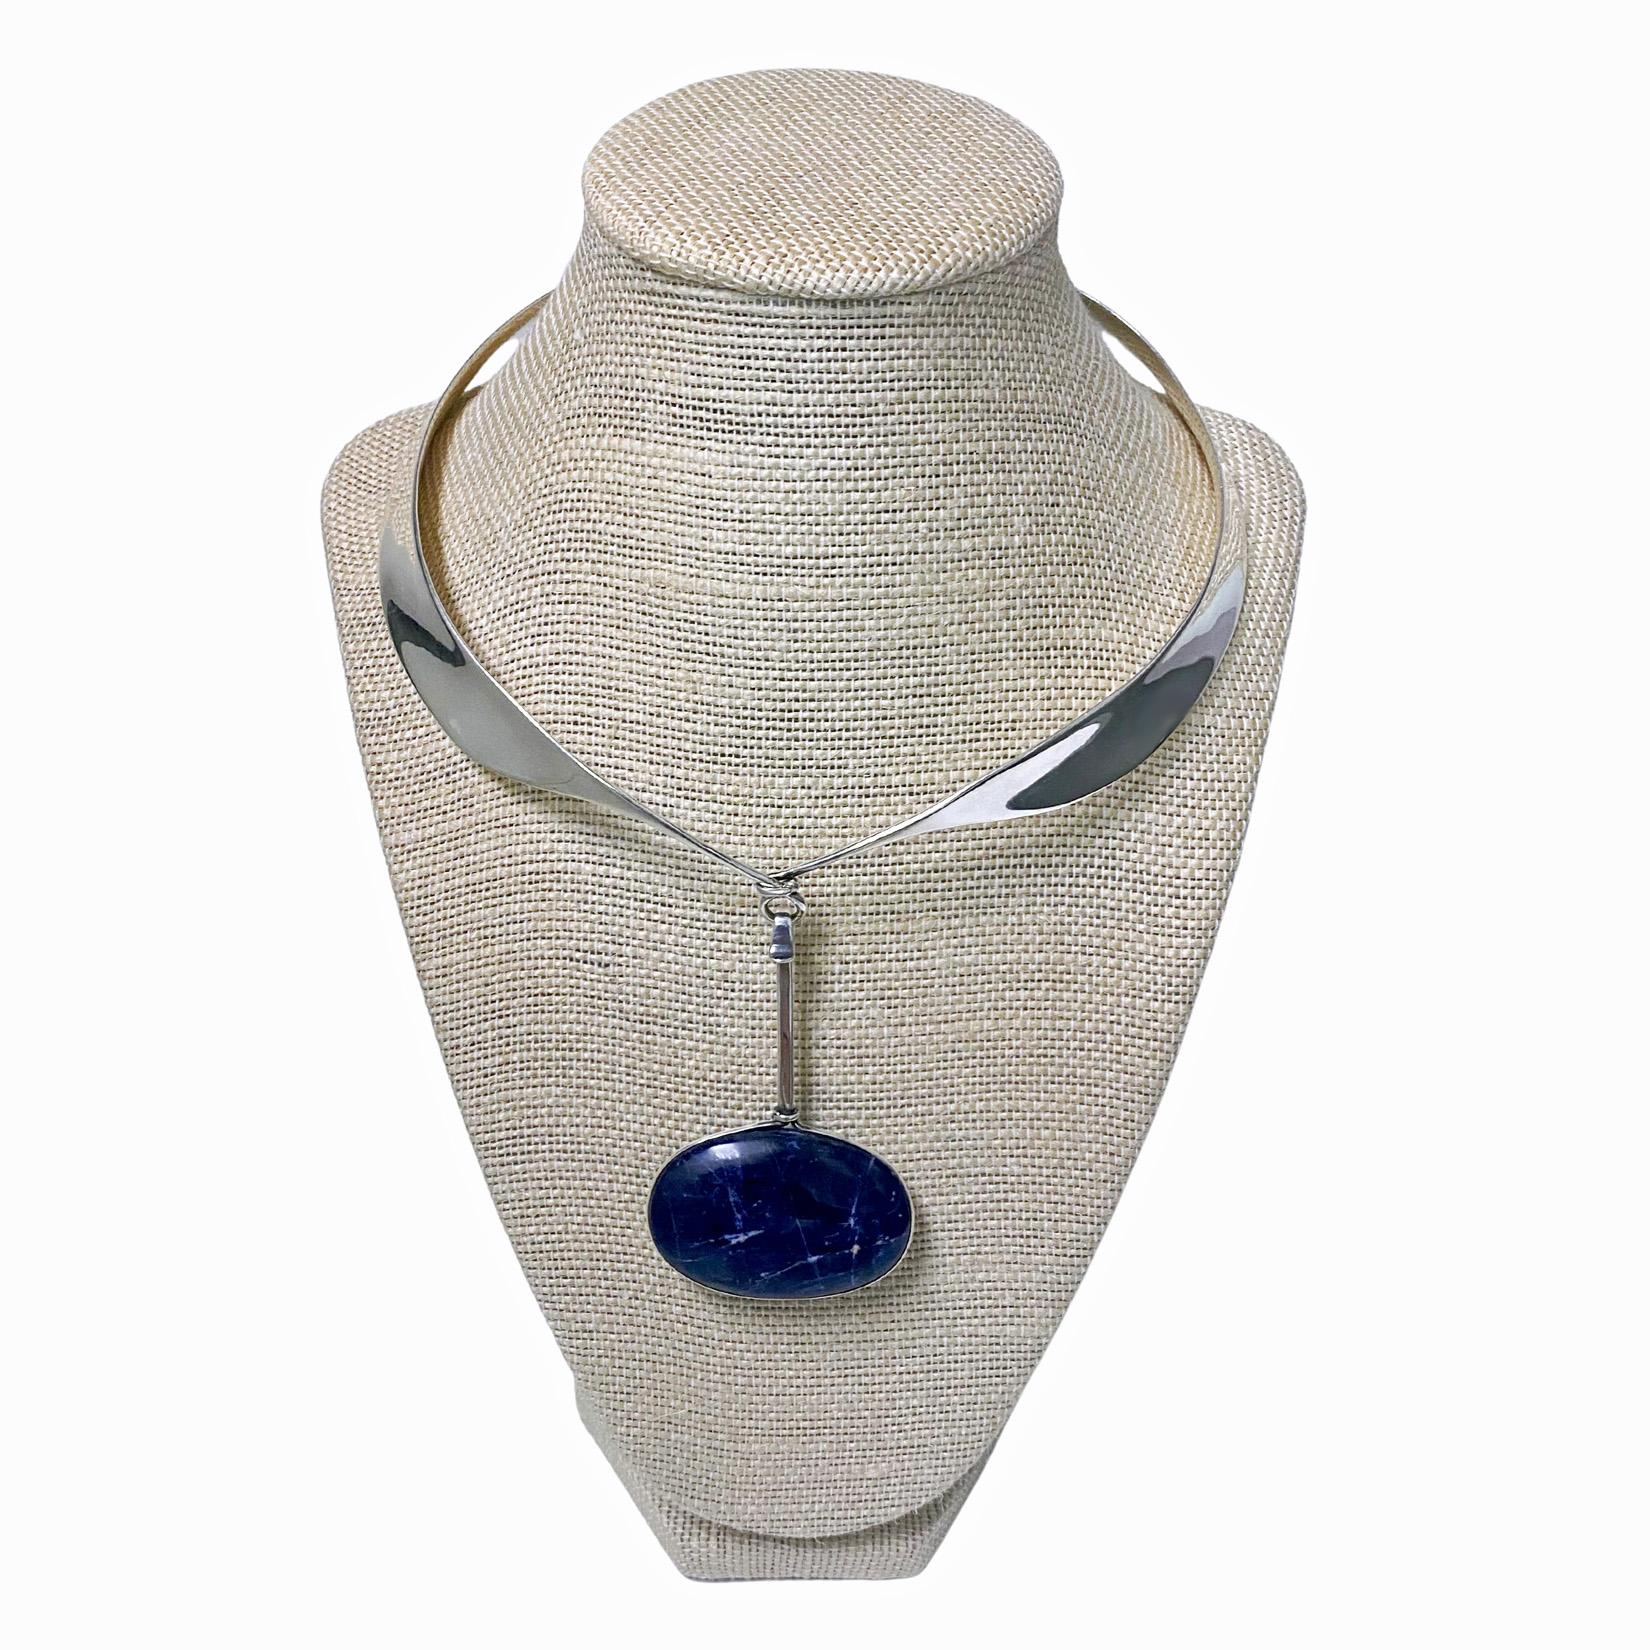 Vivianna Torun Bulow Hube for George Jensen, a rare Sterling Silver Necklace with Sodalite detachable pendant on collar, Denmark, C. 1975, stamped Georg Jensen in a dotted oval, Denmark, Torun, 133  pendant and 160 collar and 925S. Will fit up to 16